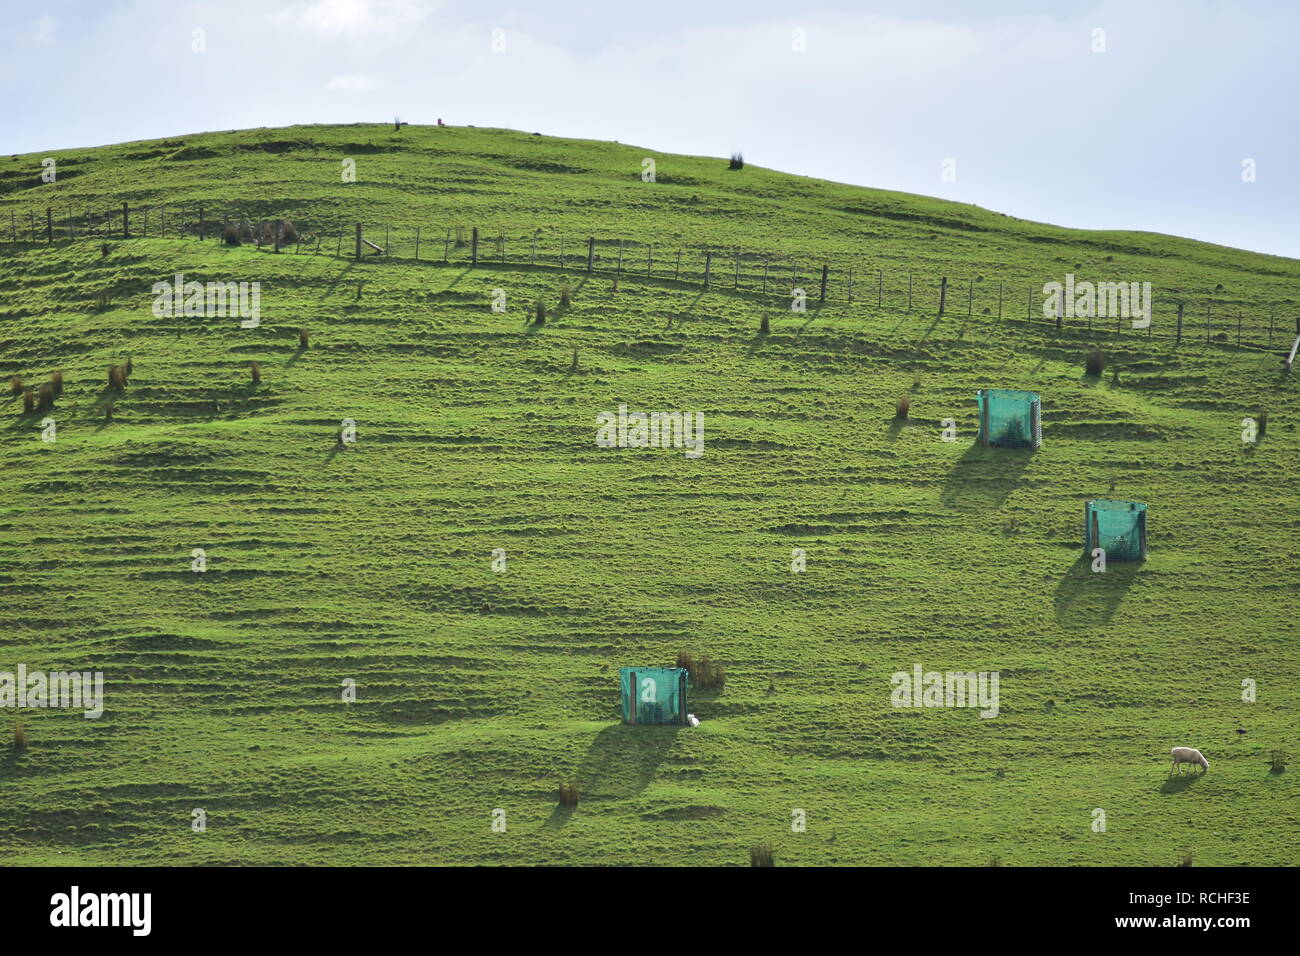 Hill with steep slopes covered with fresh green grazed grass. Note nets protecting young trees and bushes from being grazed too. Stock Photo